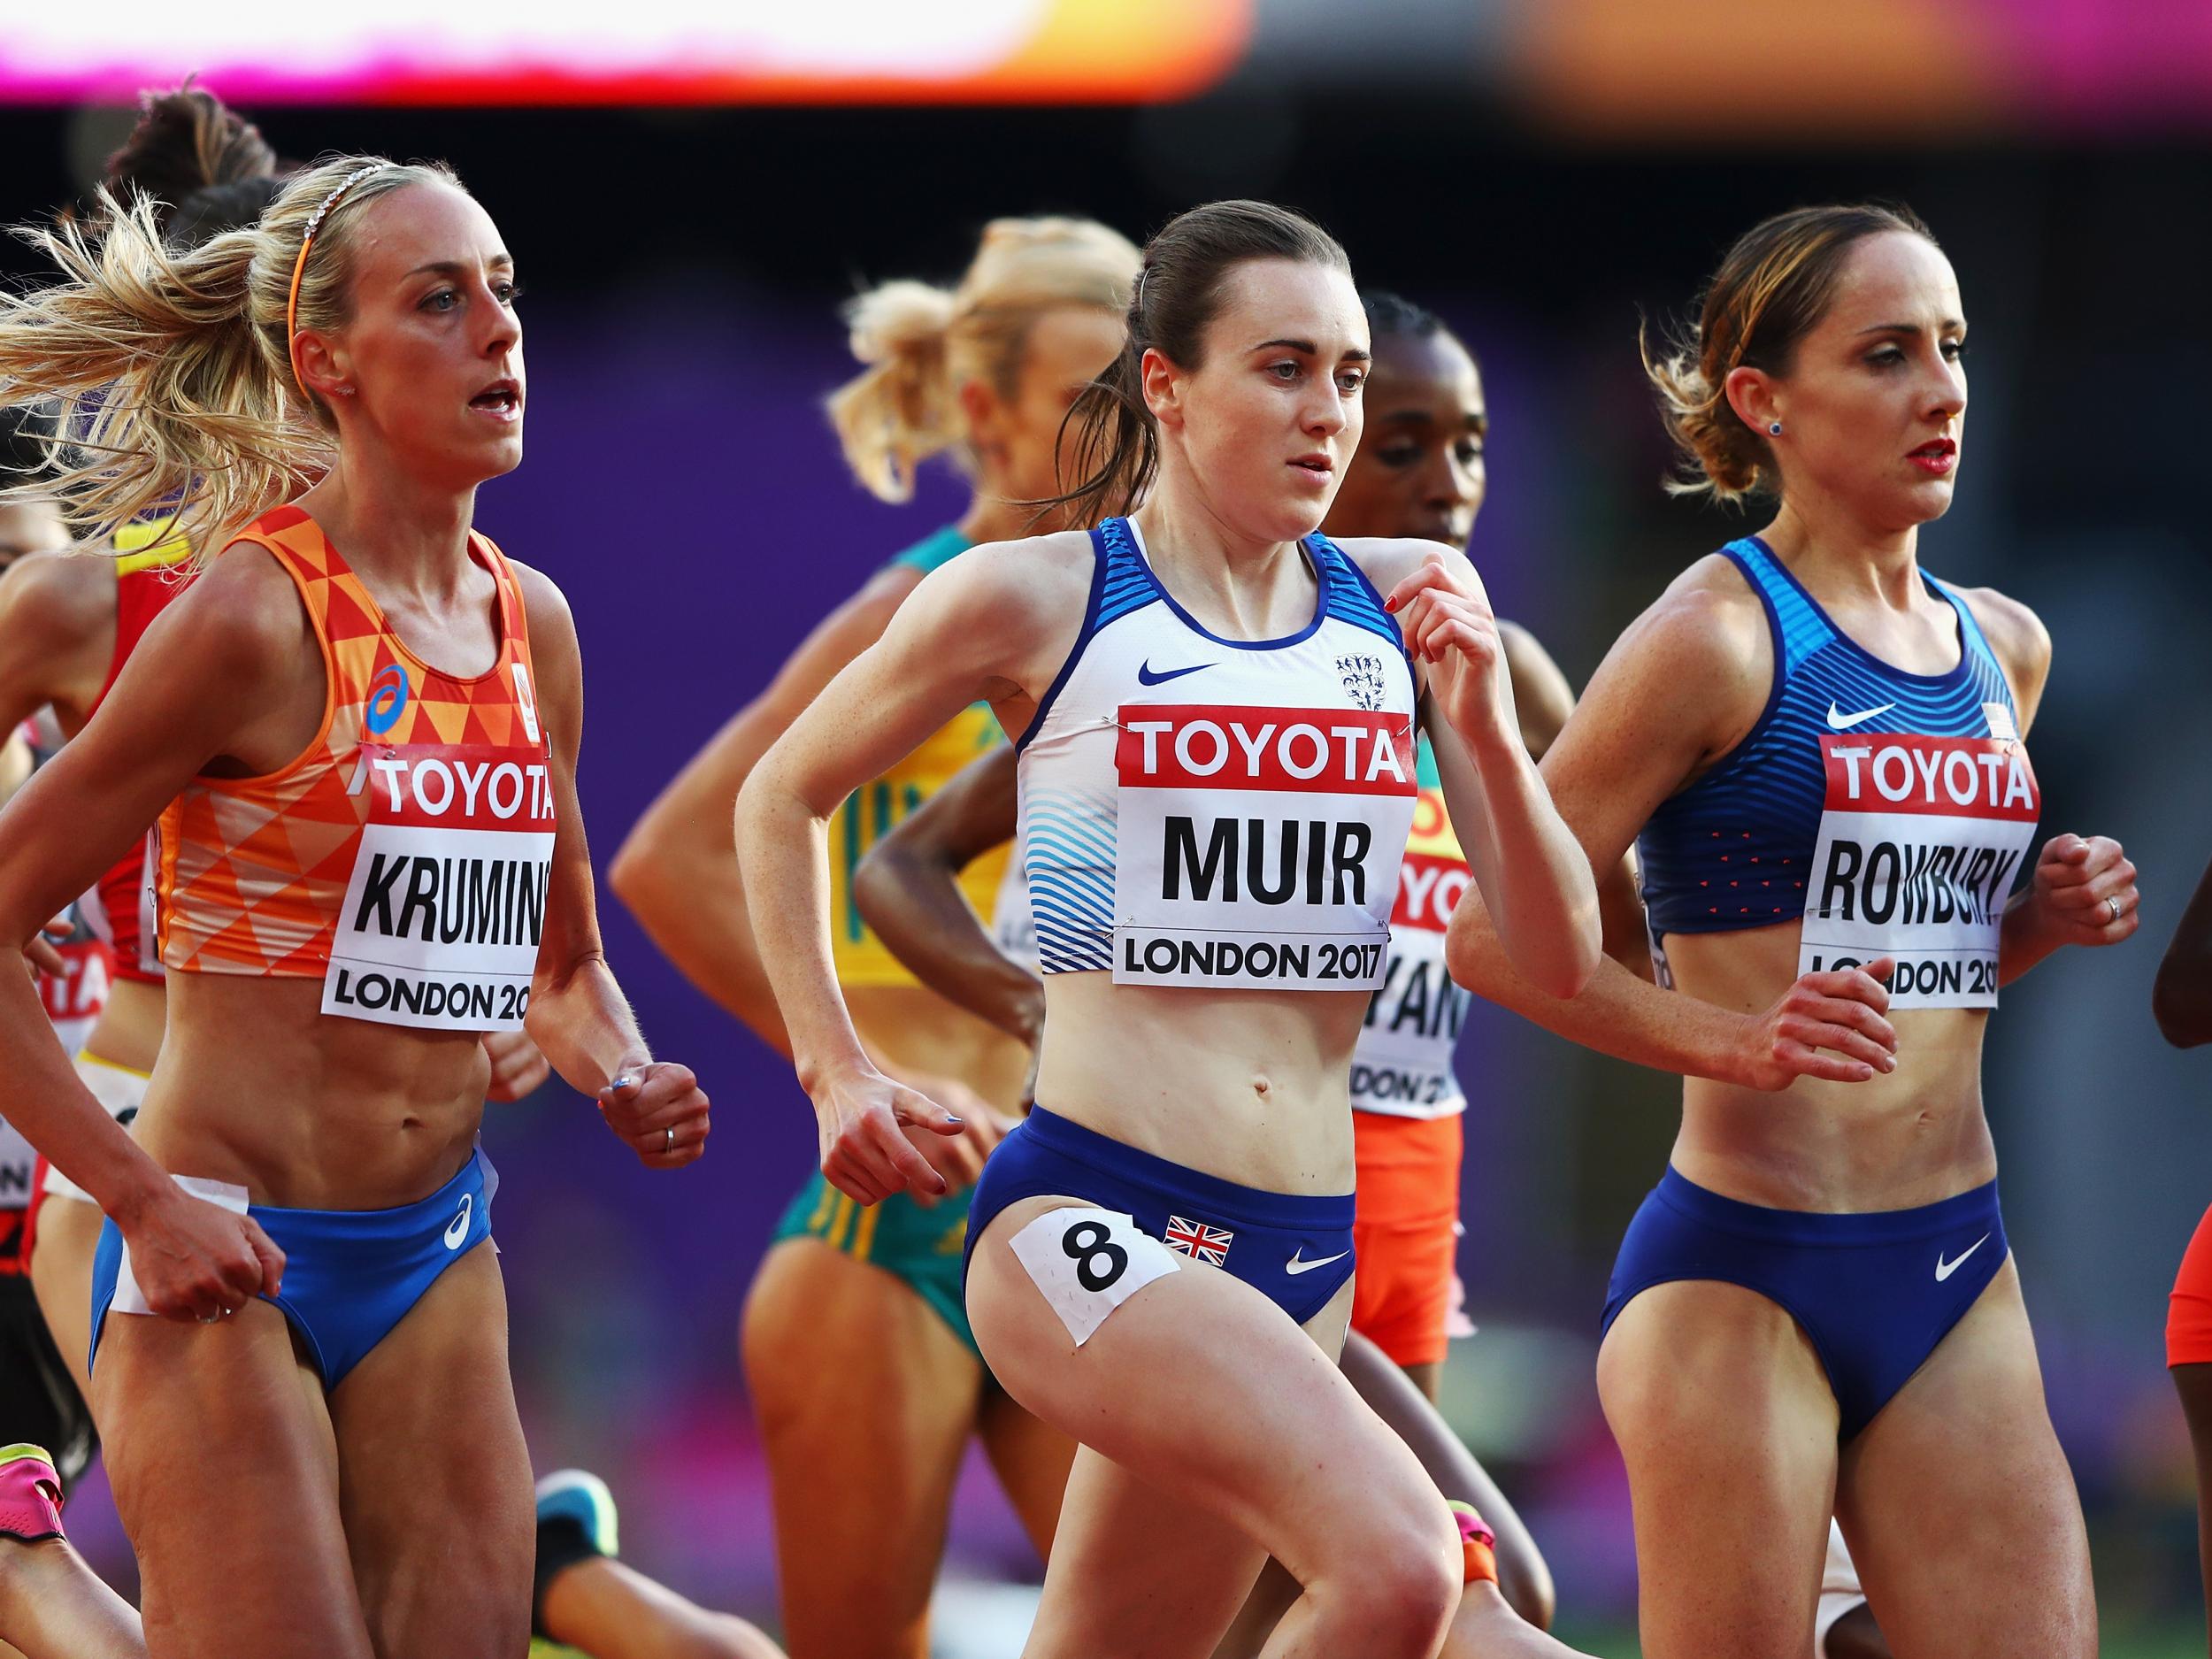 Muir is one of Britain's greatest medal hopes